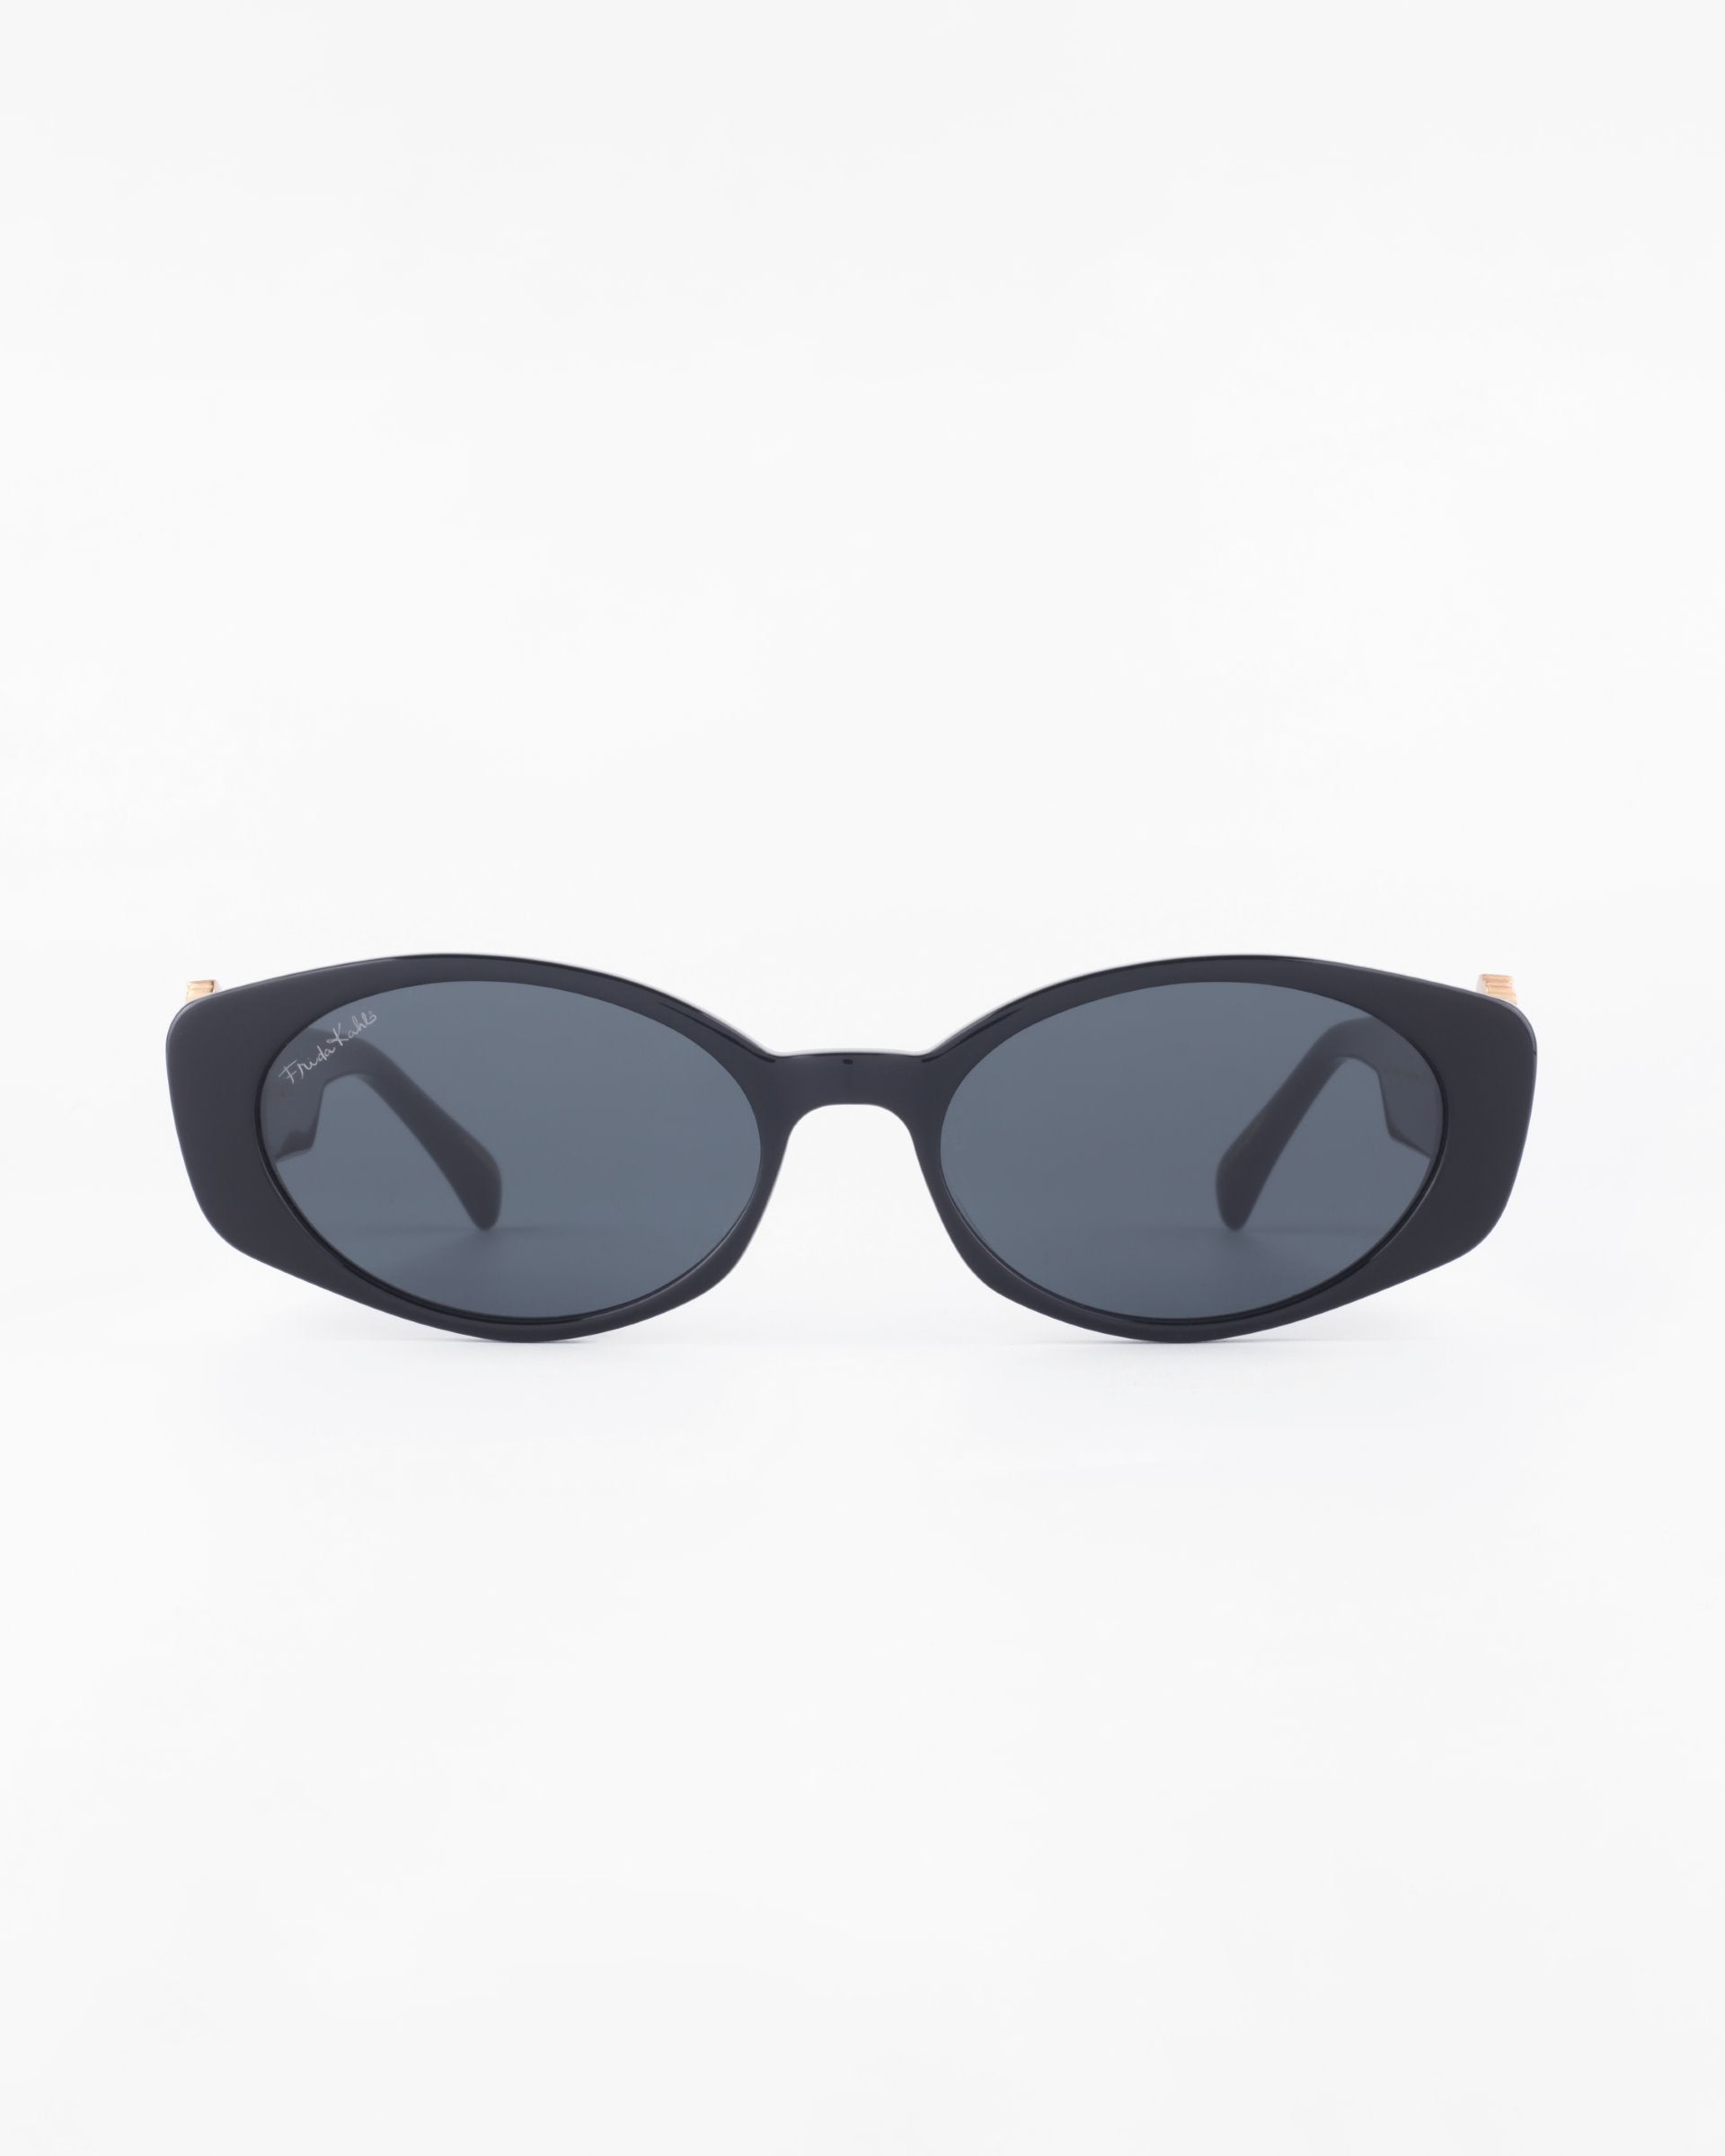 A pair of black oval-shaped Frida Portrait sunglasses by For Art's Sake® with dark tinted, ultra-lightweight nylon lenses is centered on a white background. Both arms of the sunglasses are folded, and they offer 100% UVA & UVB protection.